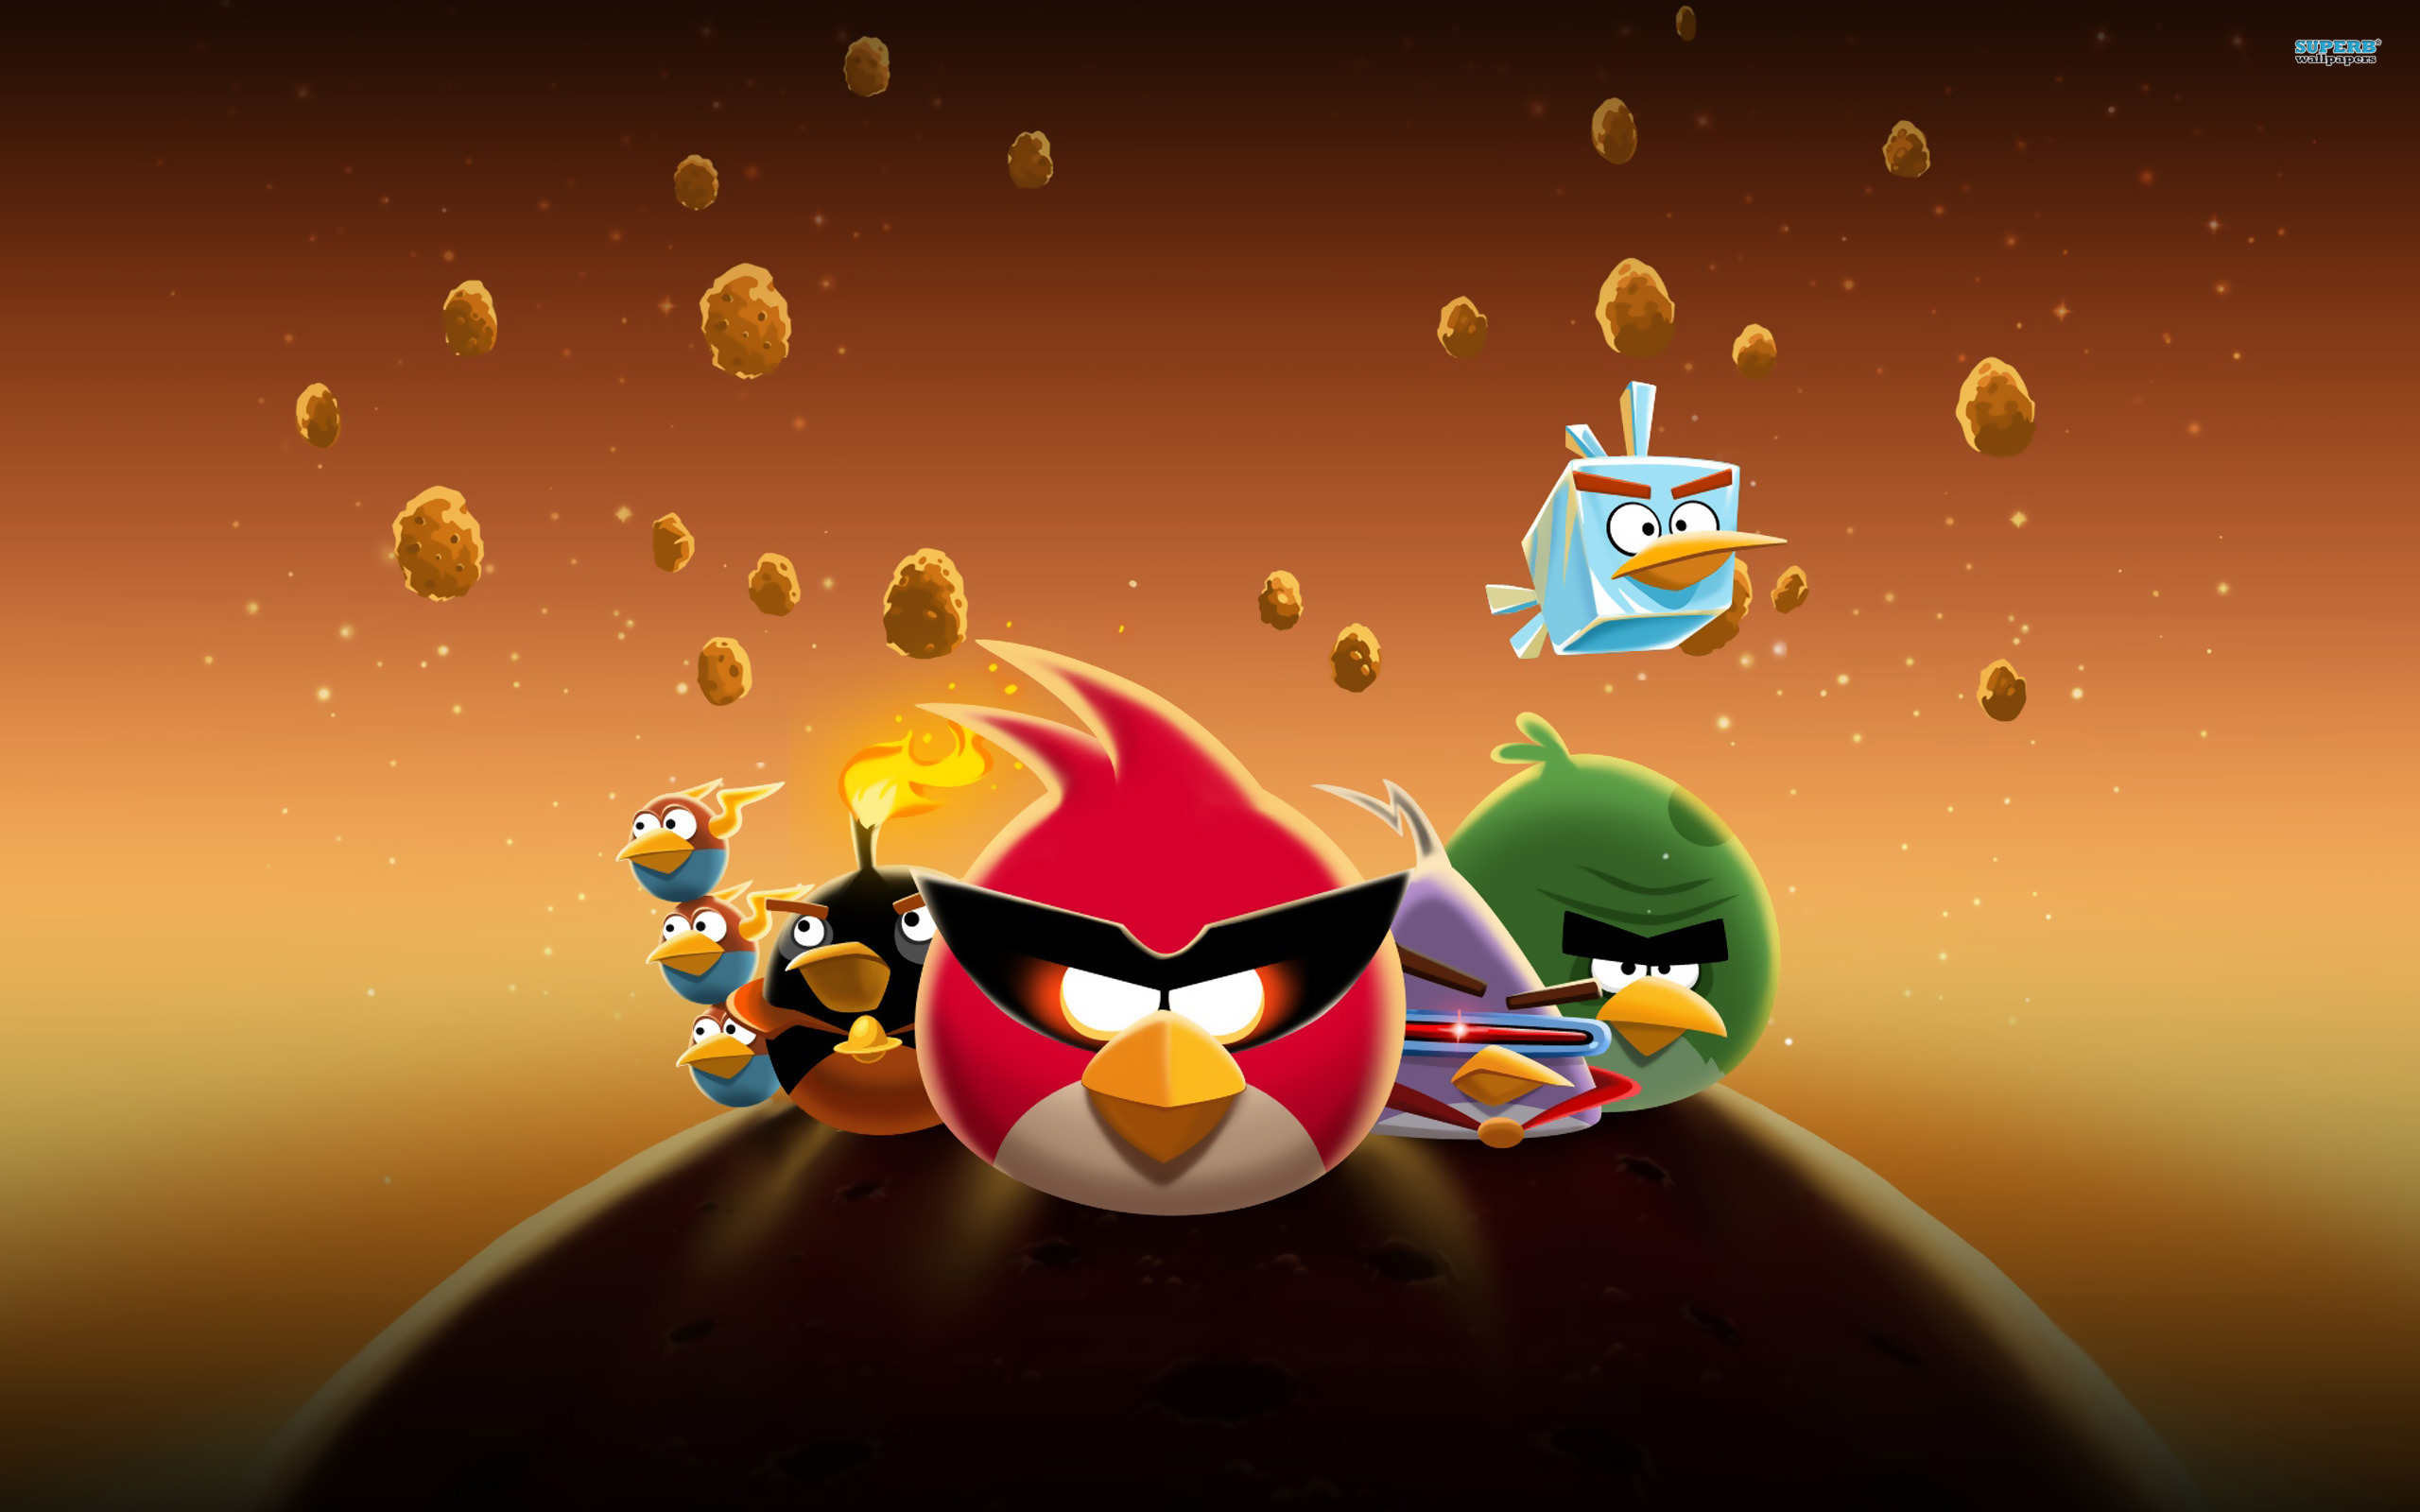 Angry Birds Space Image Wallpaper for FB Cover - Cartoons Wallpapers